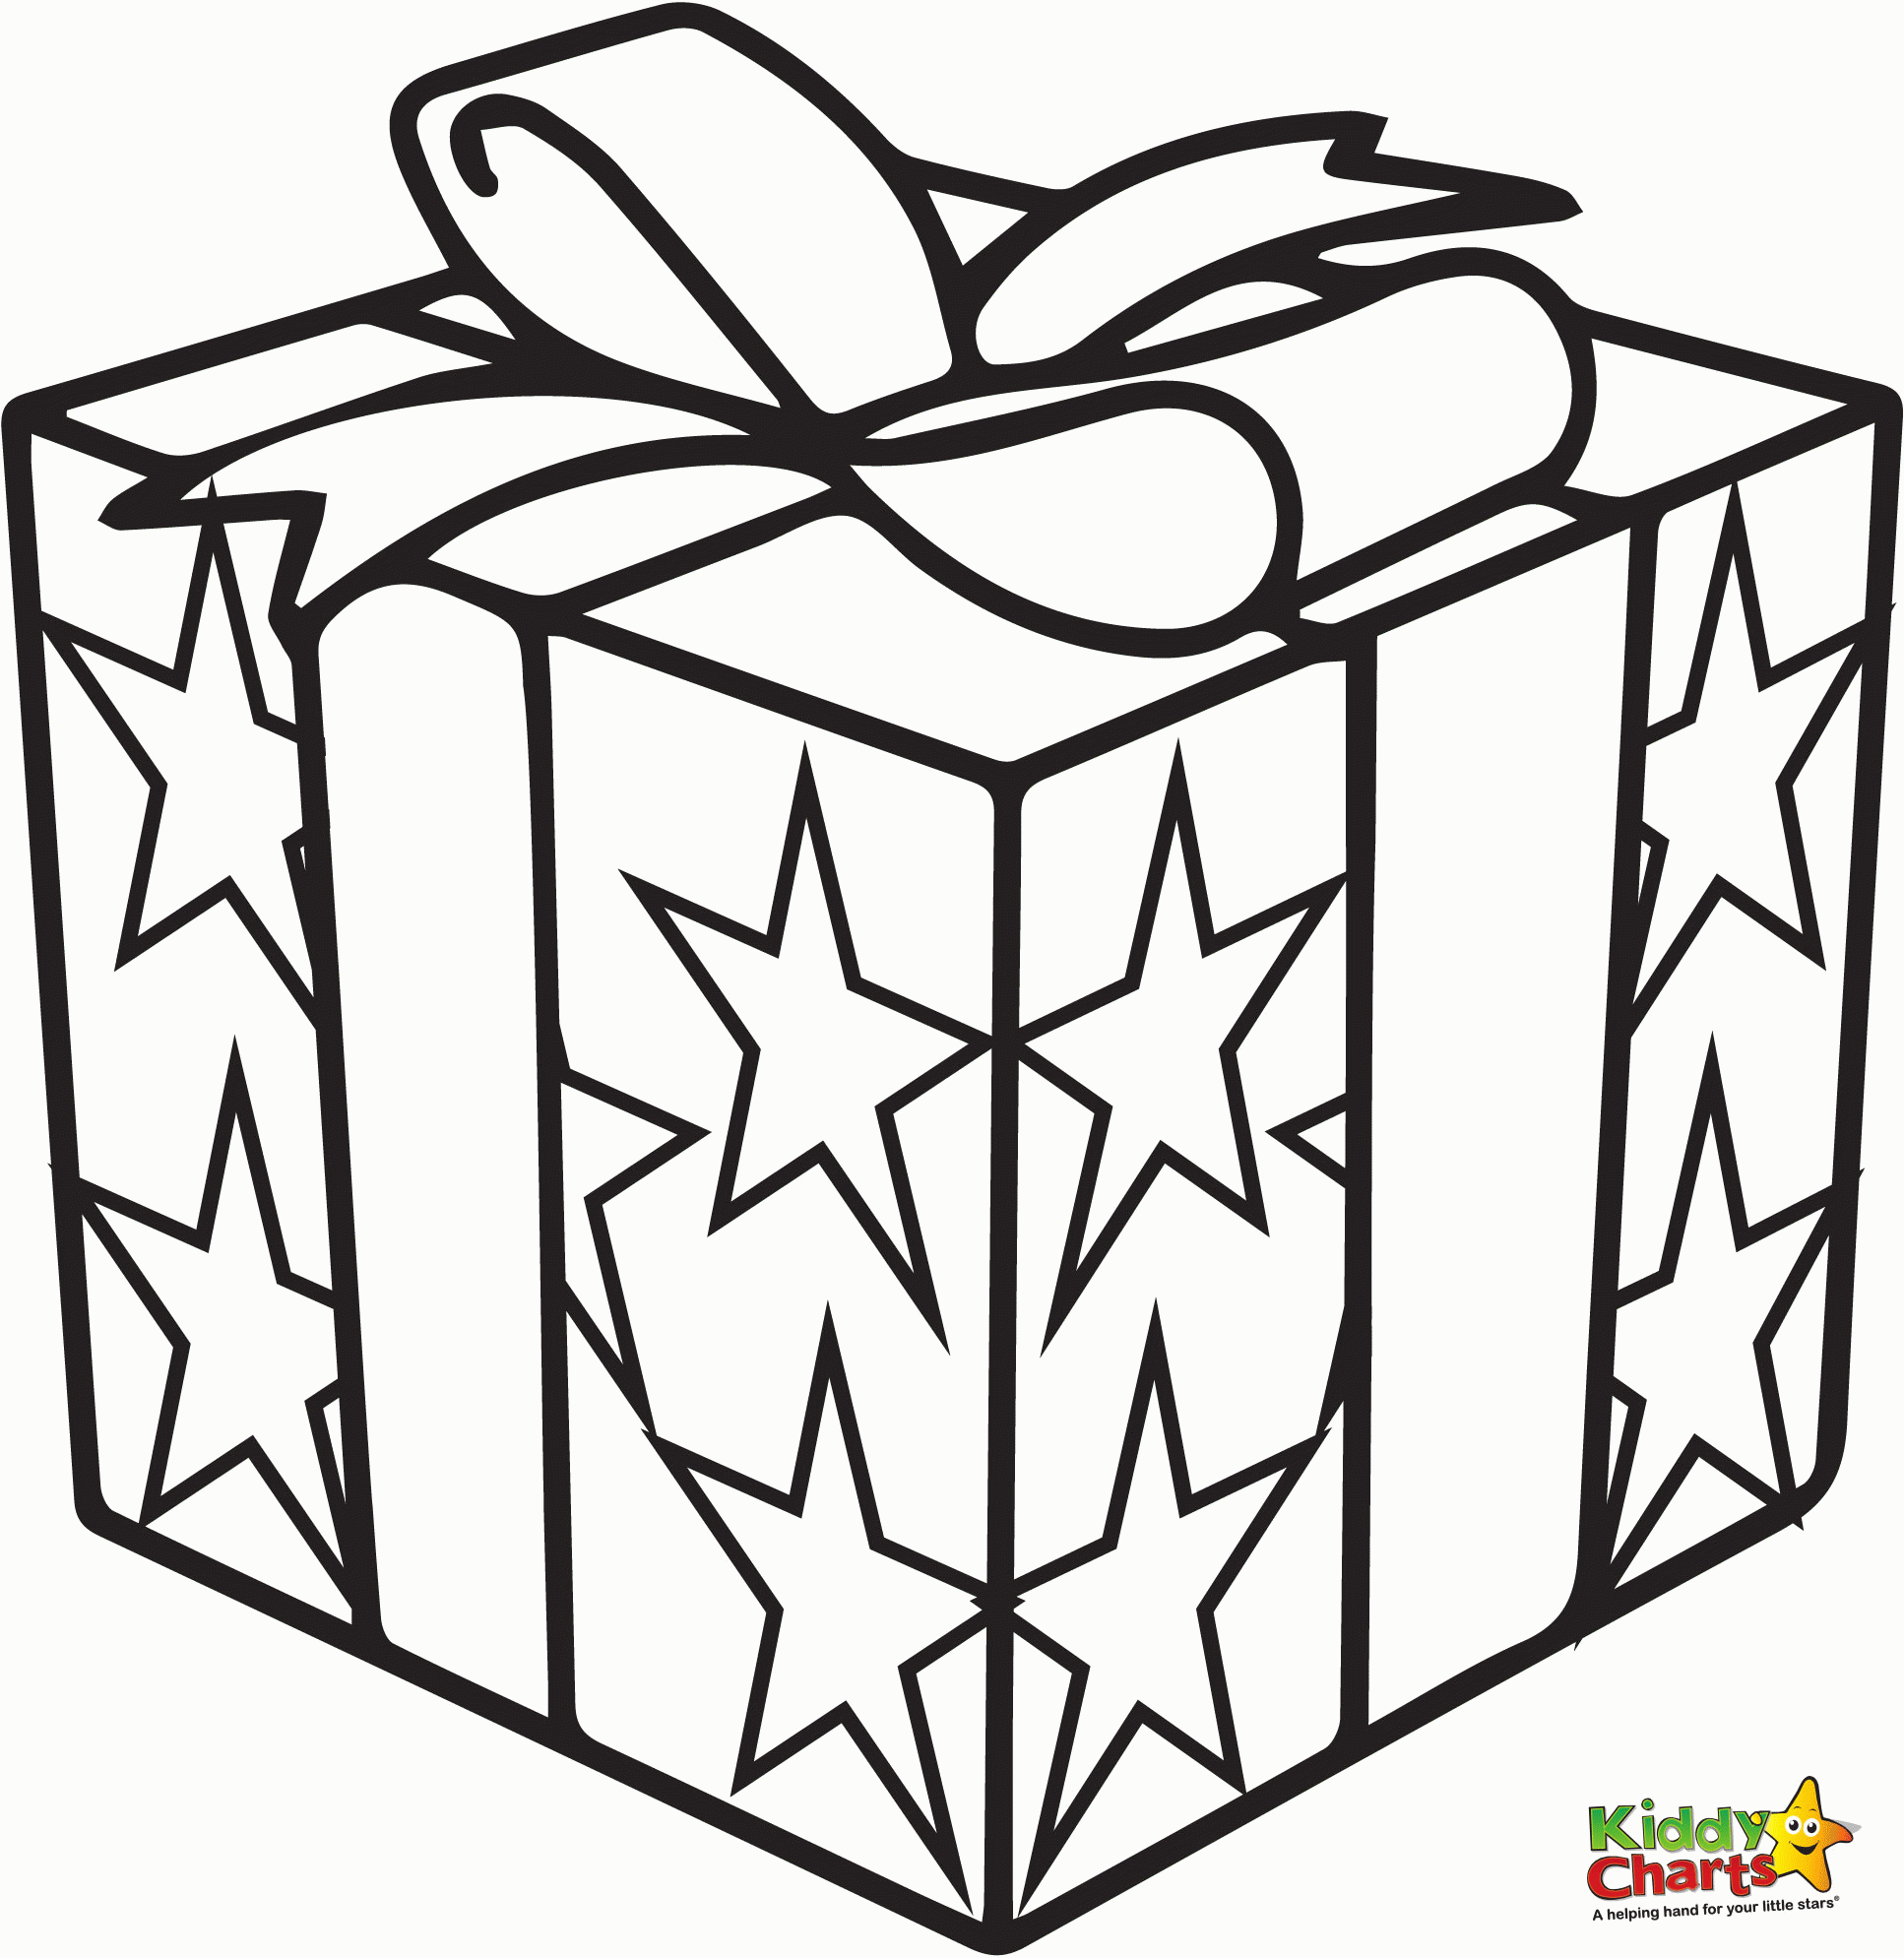 gifts clipart colouring